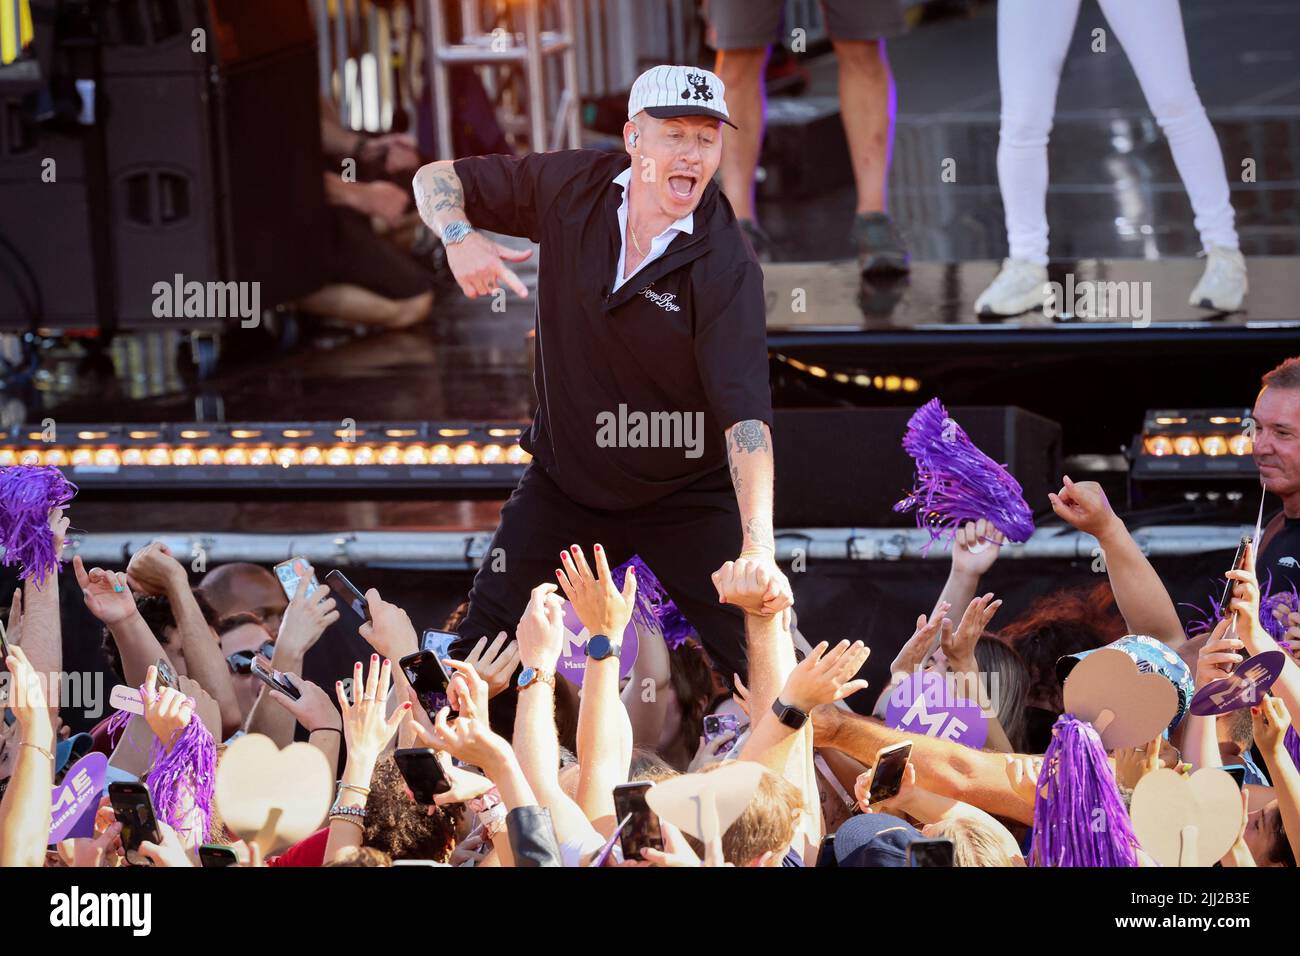 Singer Macklemore crowd surfs during a performance on ABC's 'Good Morning America' show in New York City, U.S., July 22, 2022.  REUTERS/Brendan McDermid Stock Photo